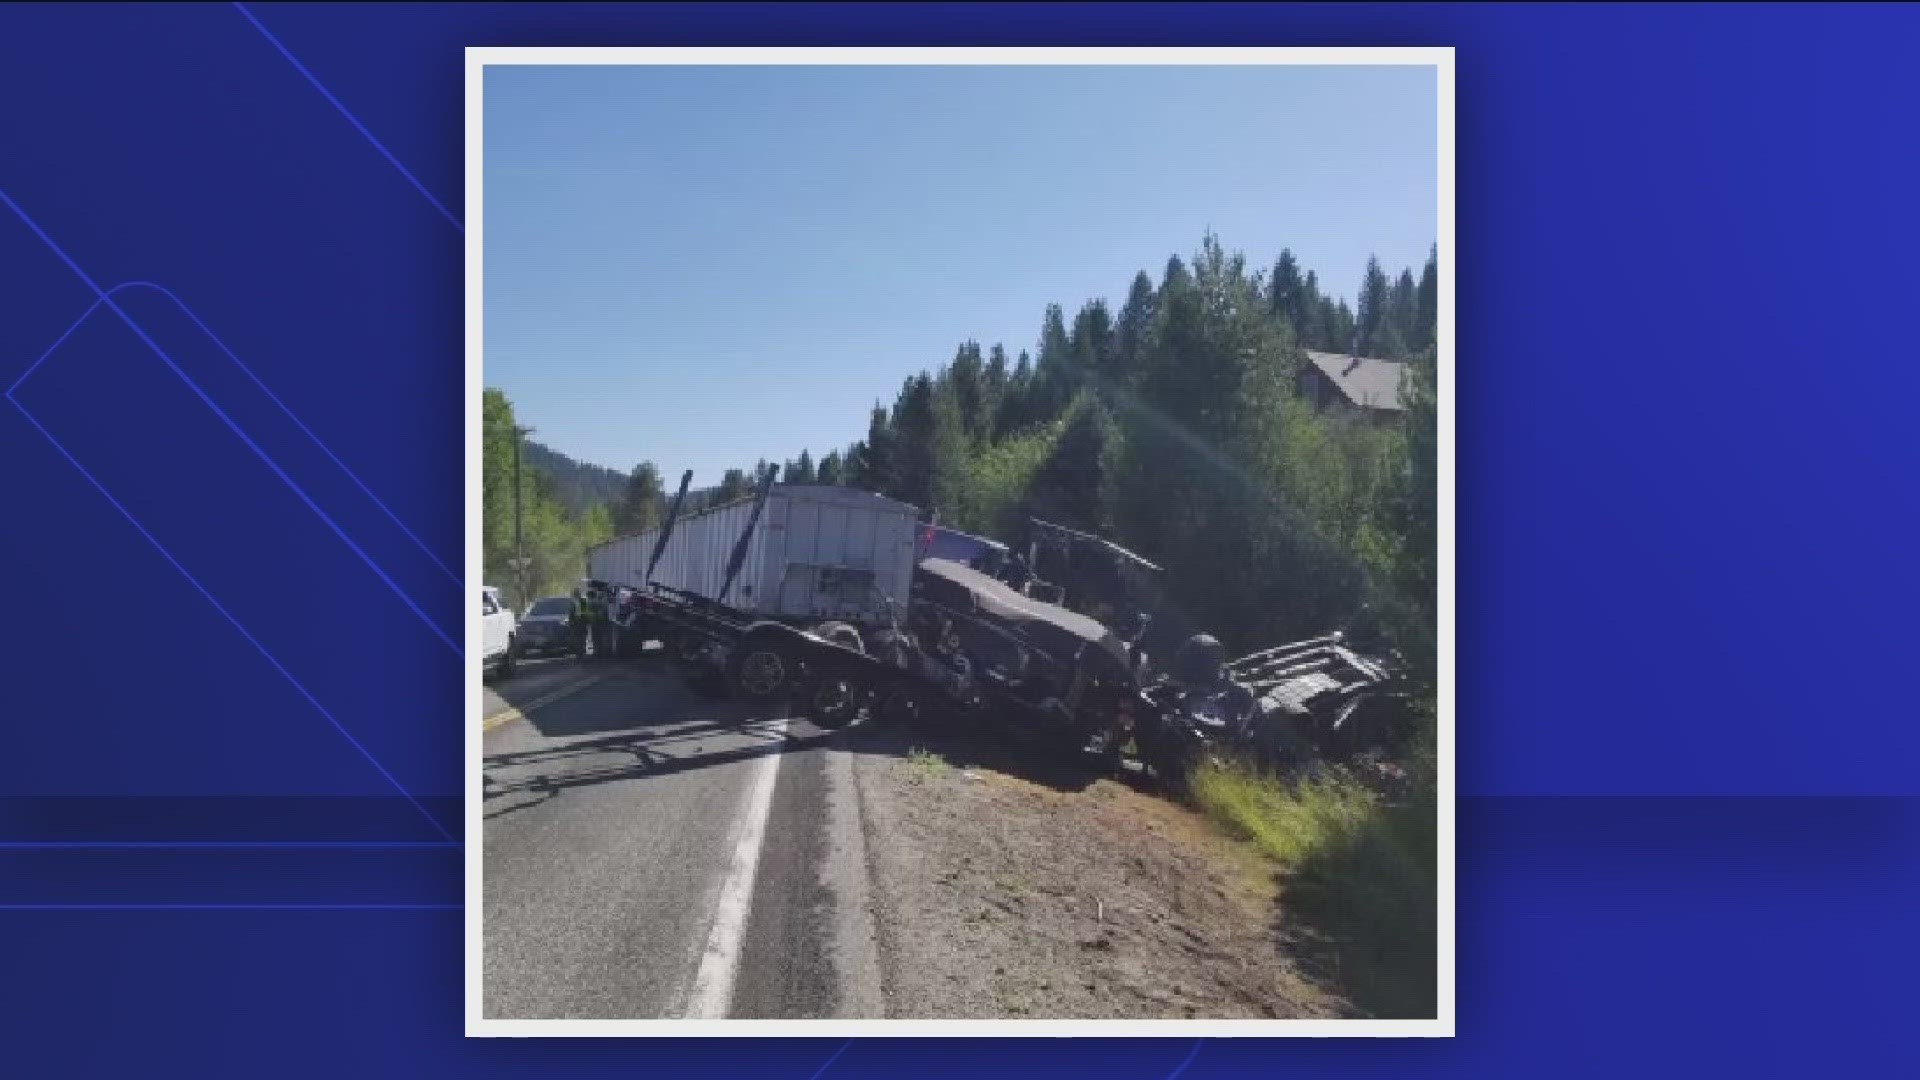 Police said there was a three-vehicle-crash, the driver of the semi-truck was taken to the hospital. No other injuries are reported.